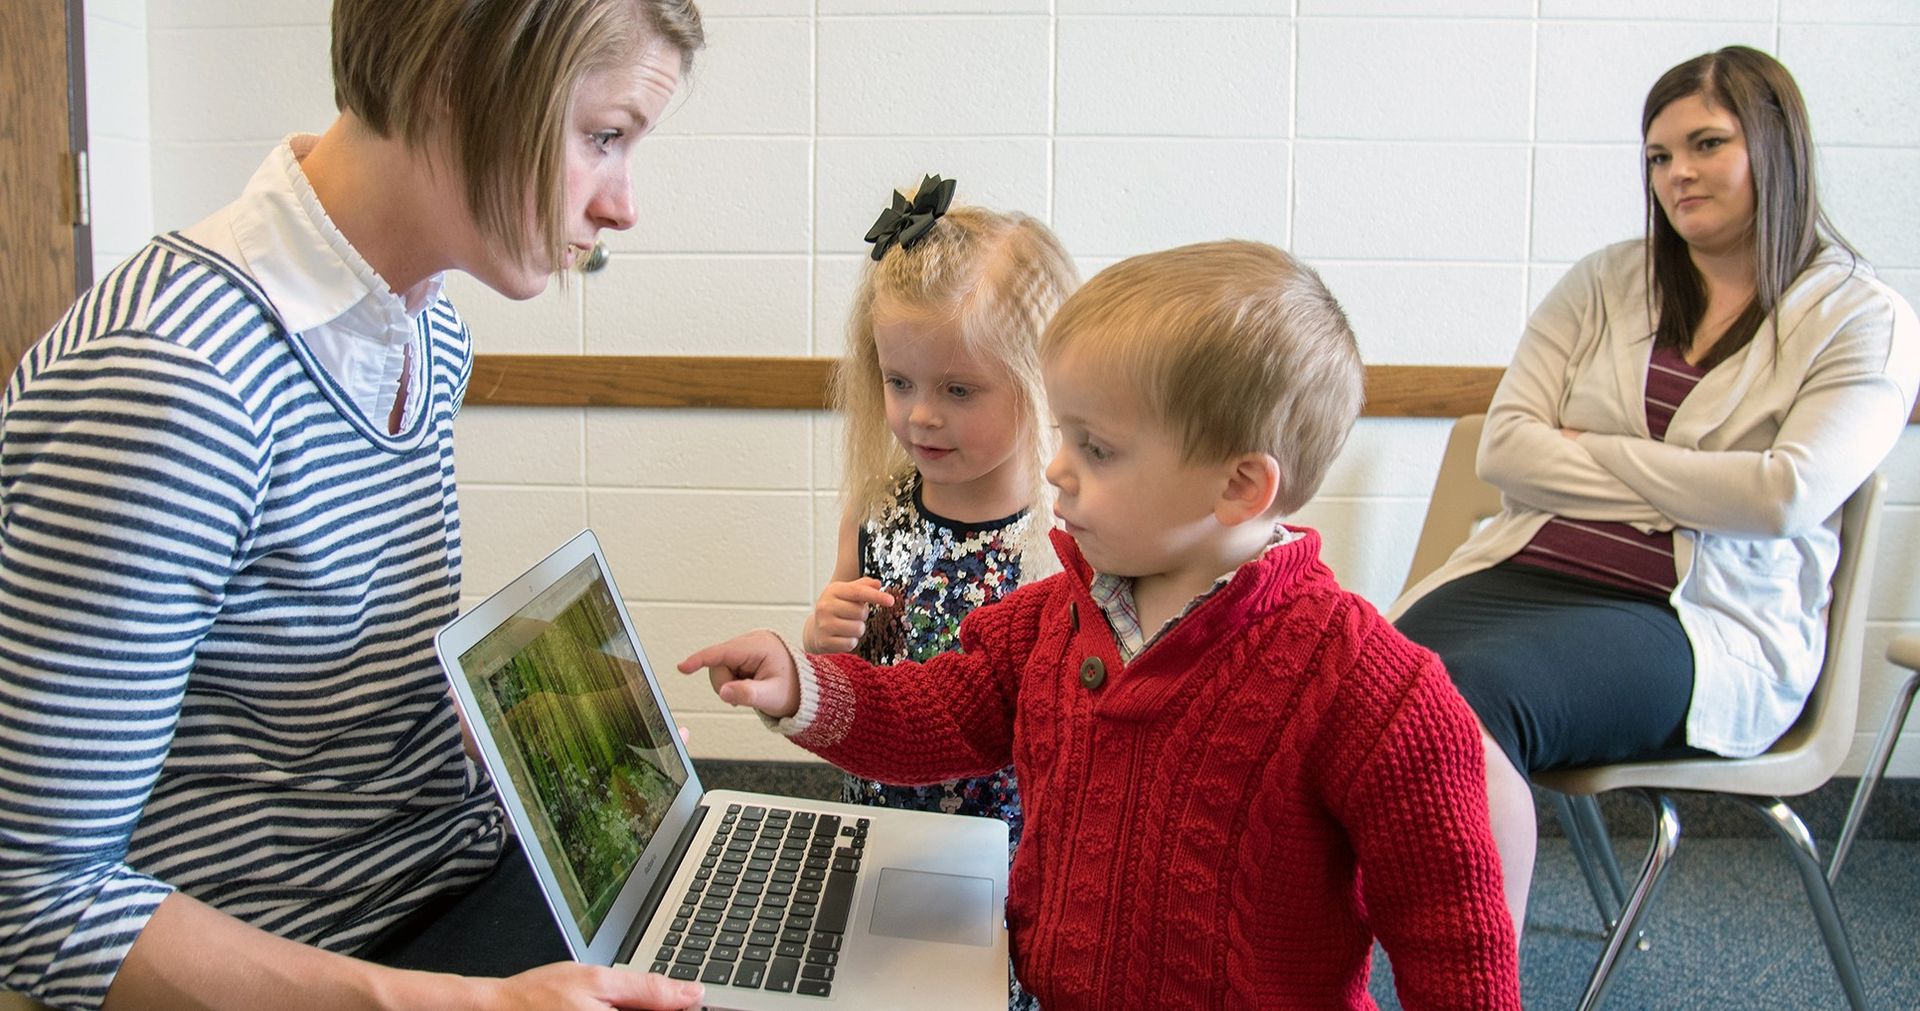 A woman showing a computer to young children.